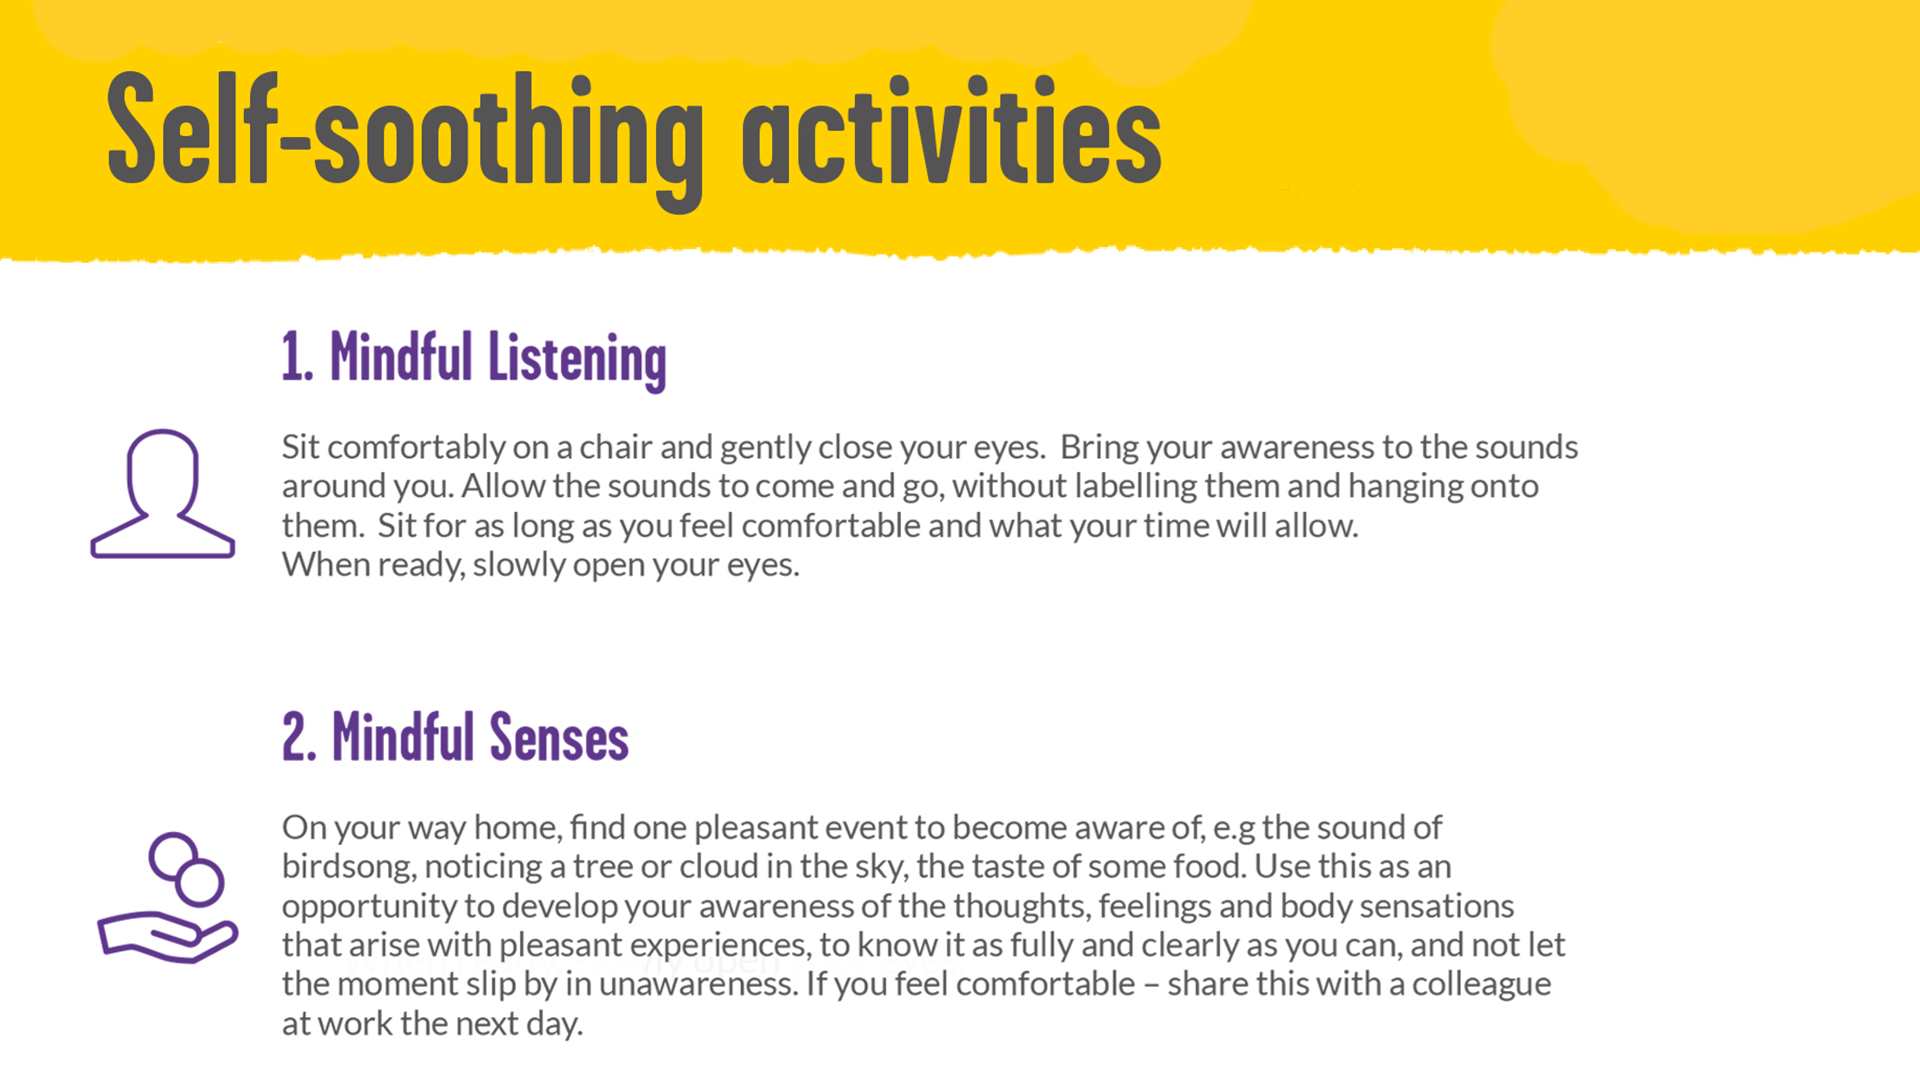 An image of our 'Self-soothing activities' poster. On the left hand side of the poster next to the first two bullet points is an outline of a person and below it a outline of a hand with coins above it.